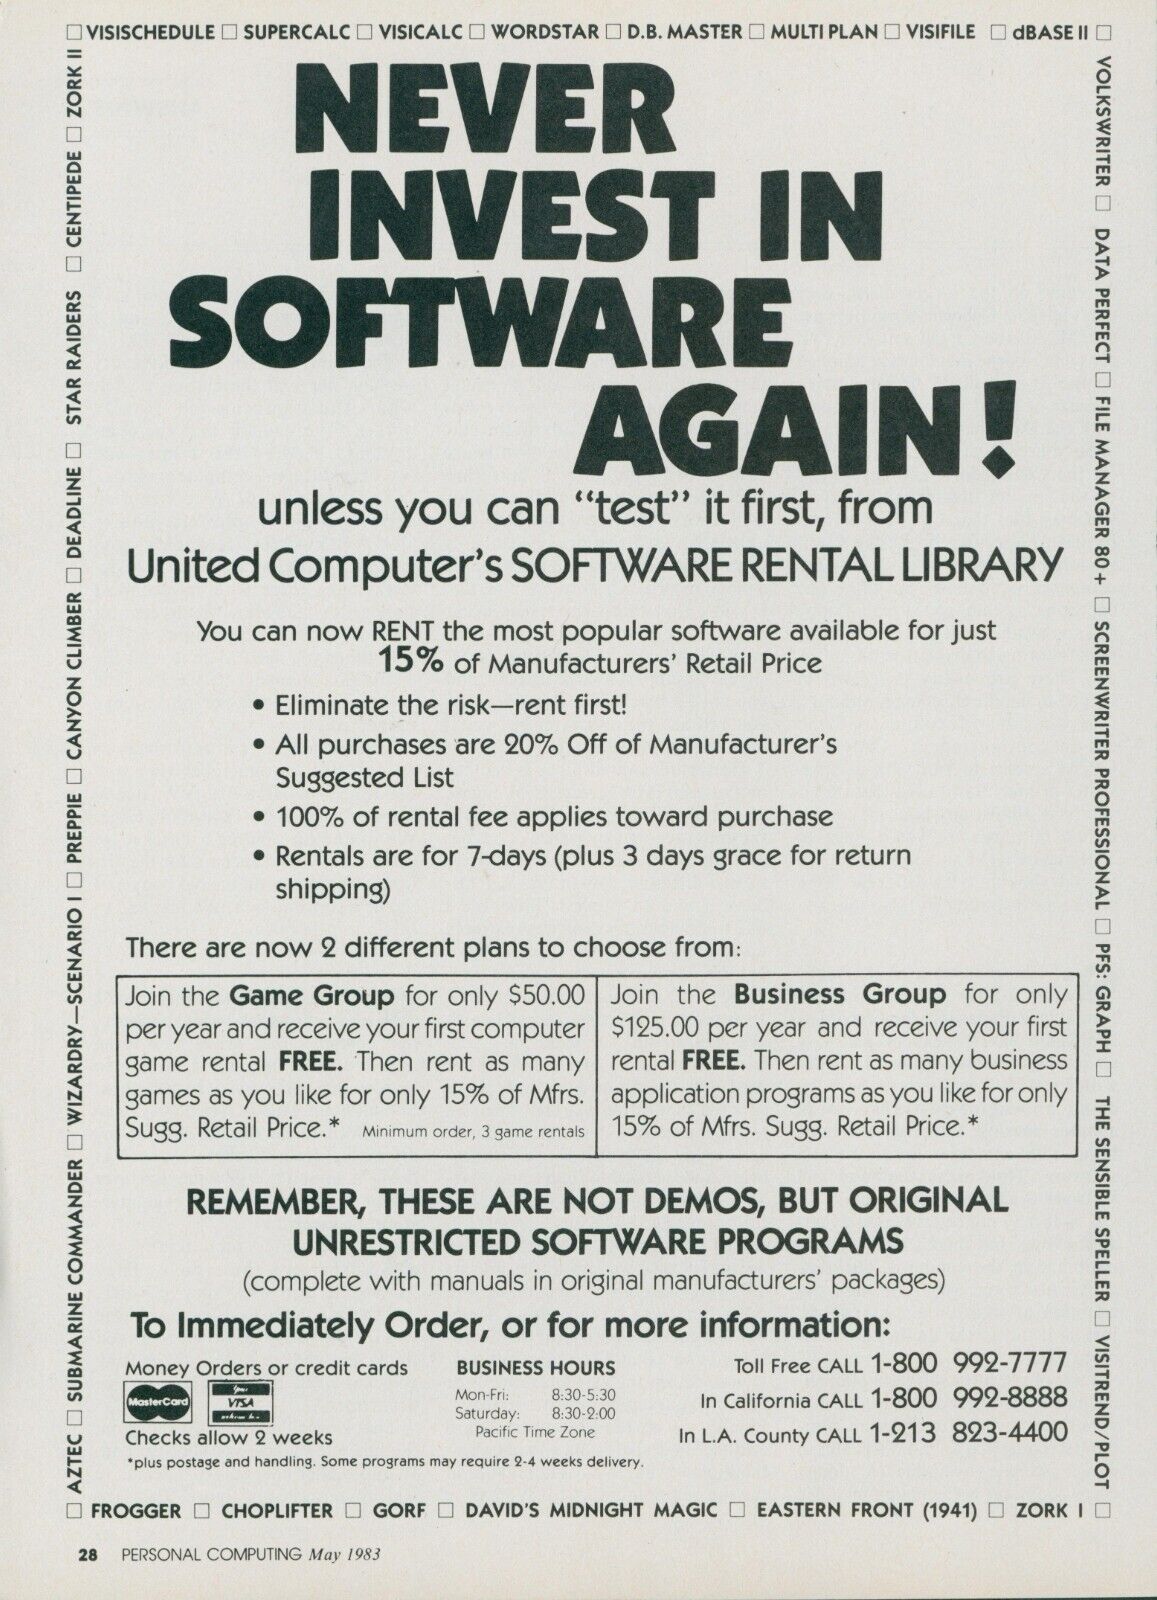 1983 United Computer Software Rental Library Never Invest Again Ad PEC1